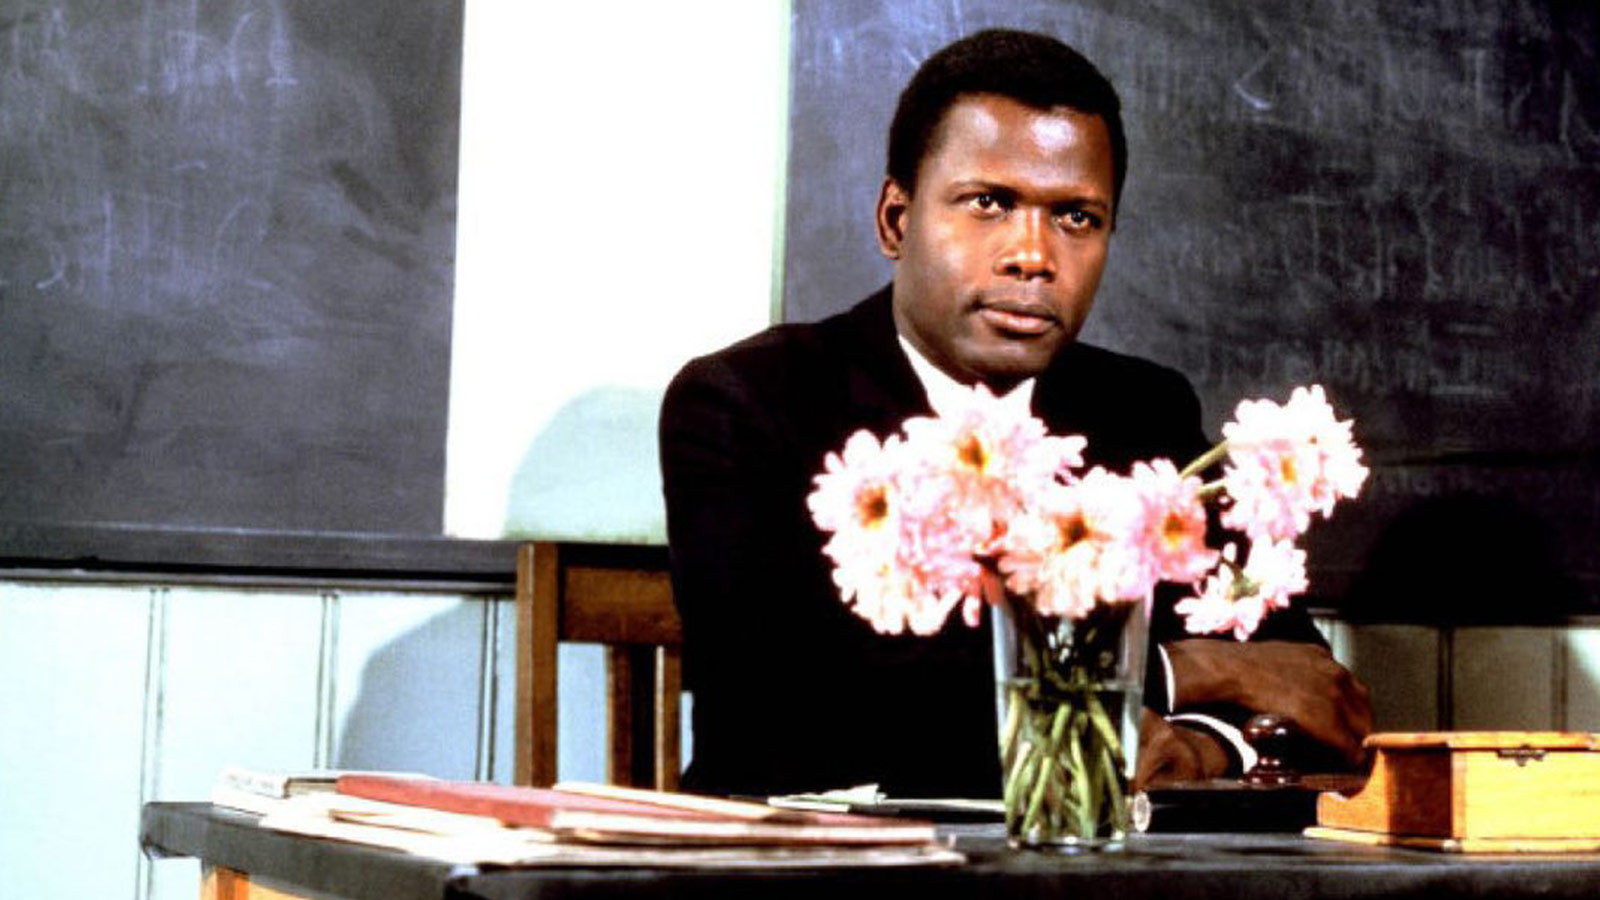 The great actor and director Sidney Poitier is dead at 94